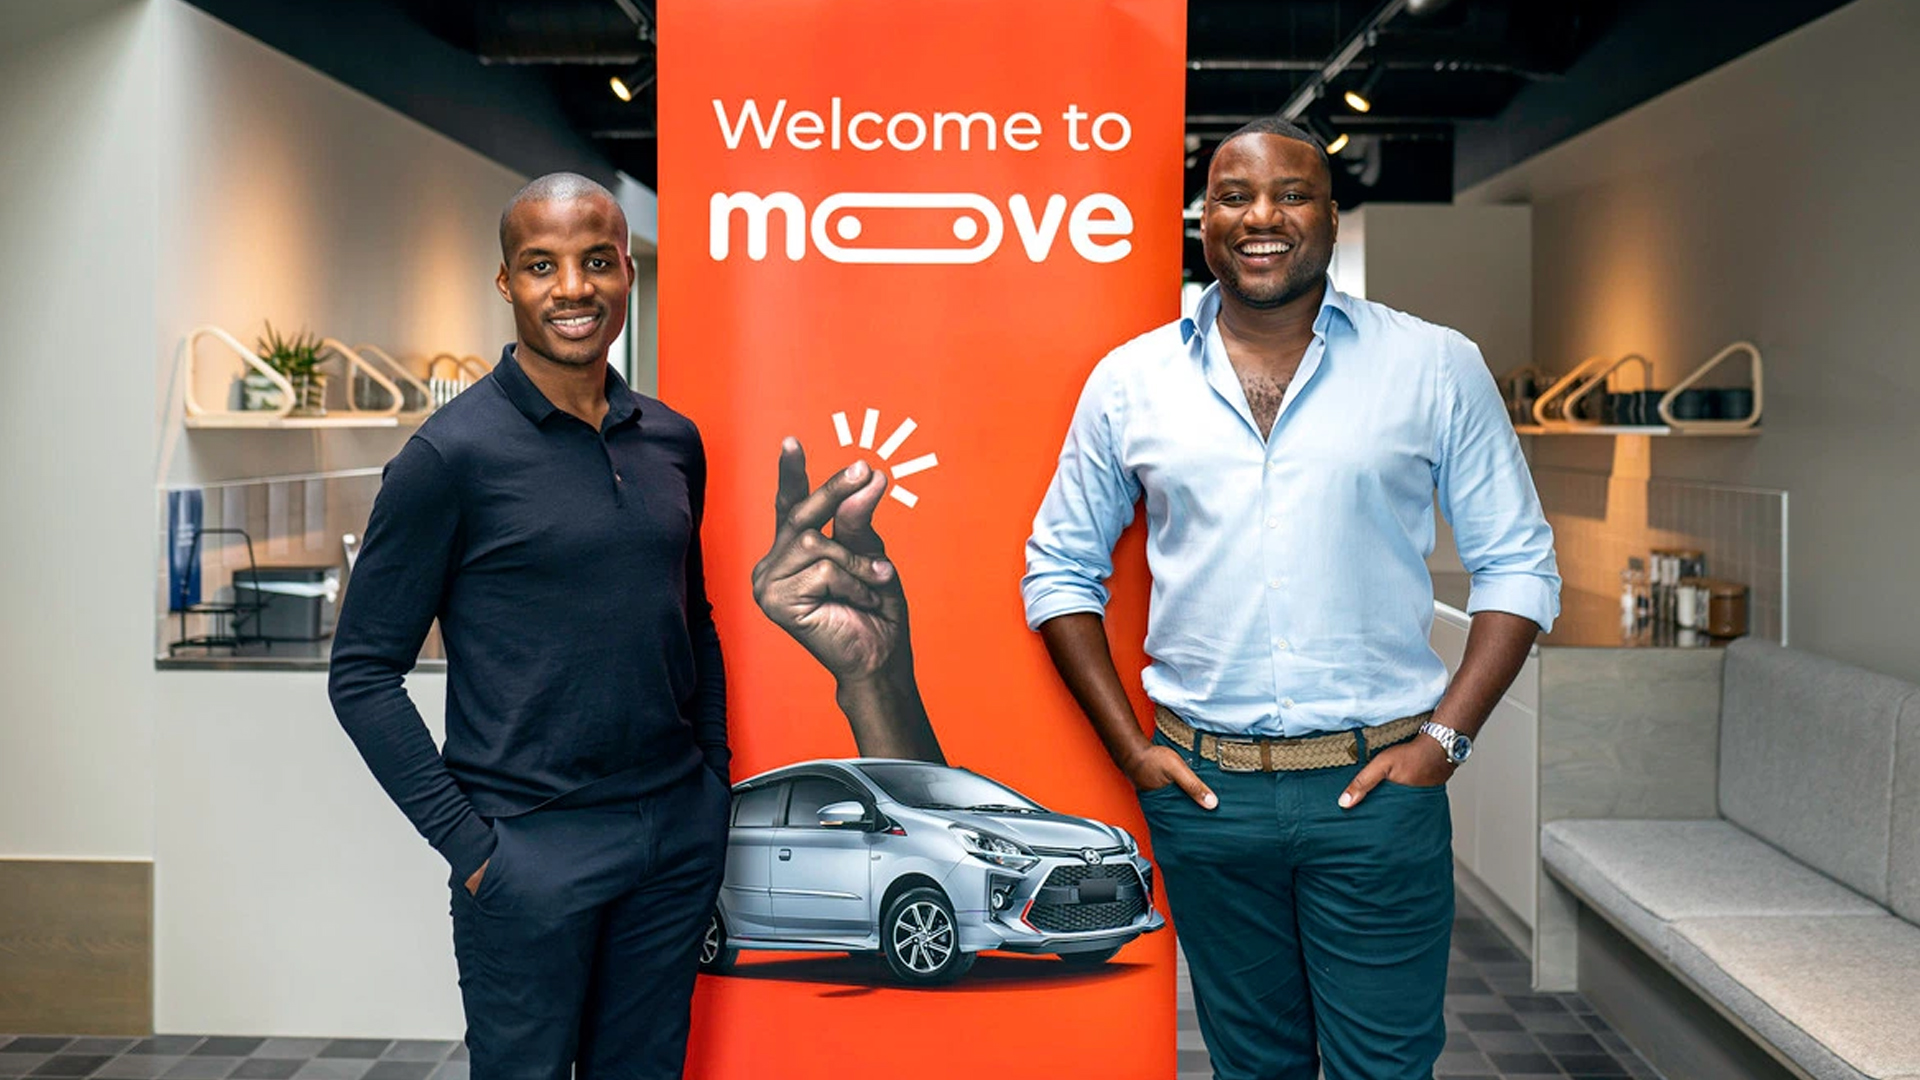 Nigerian Uber Partner Moove Raises $23M Series A To Champion Car Ownership For African Drivers